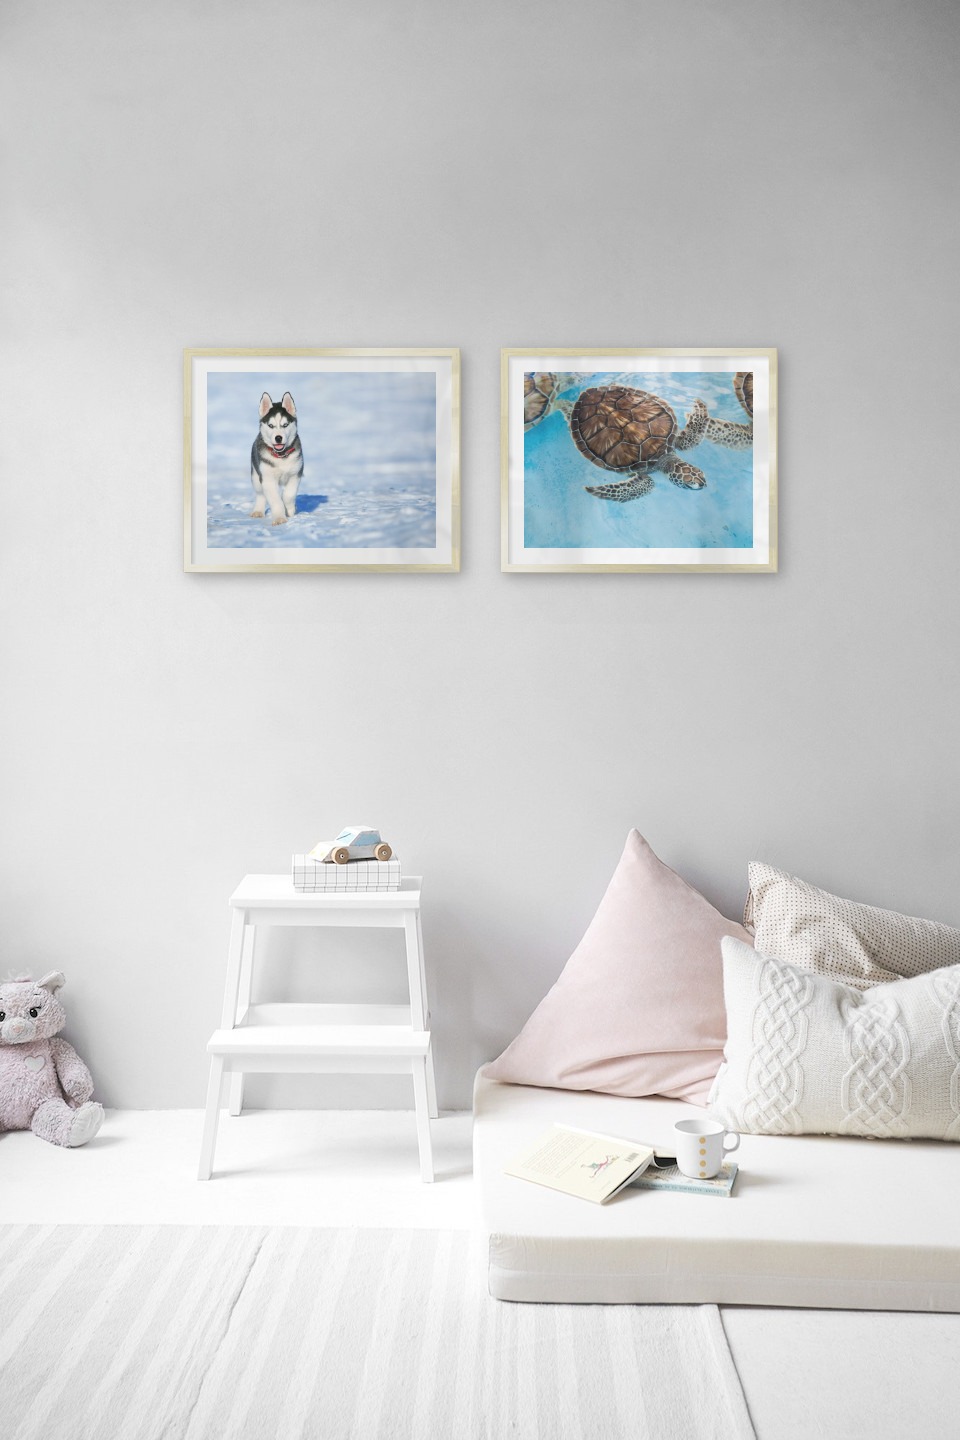 Gallery wall with picture frames in gold in sizes 40x50 with prints "Husky" and "Turtle in the water"